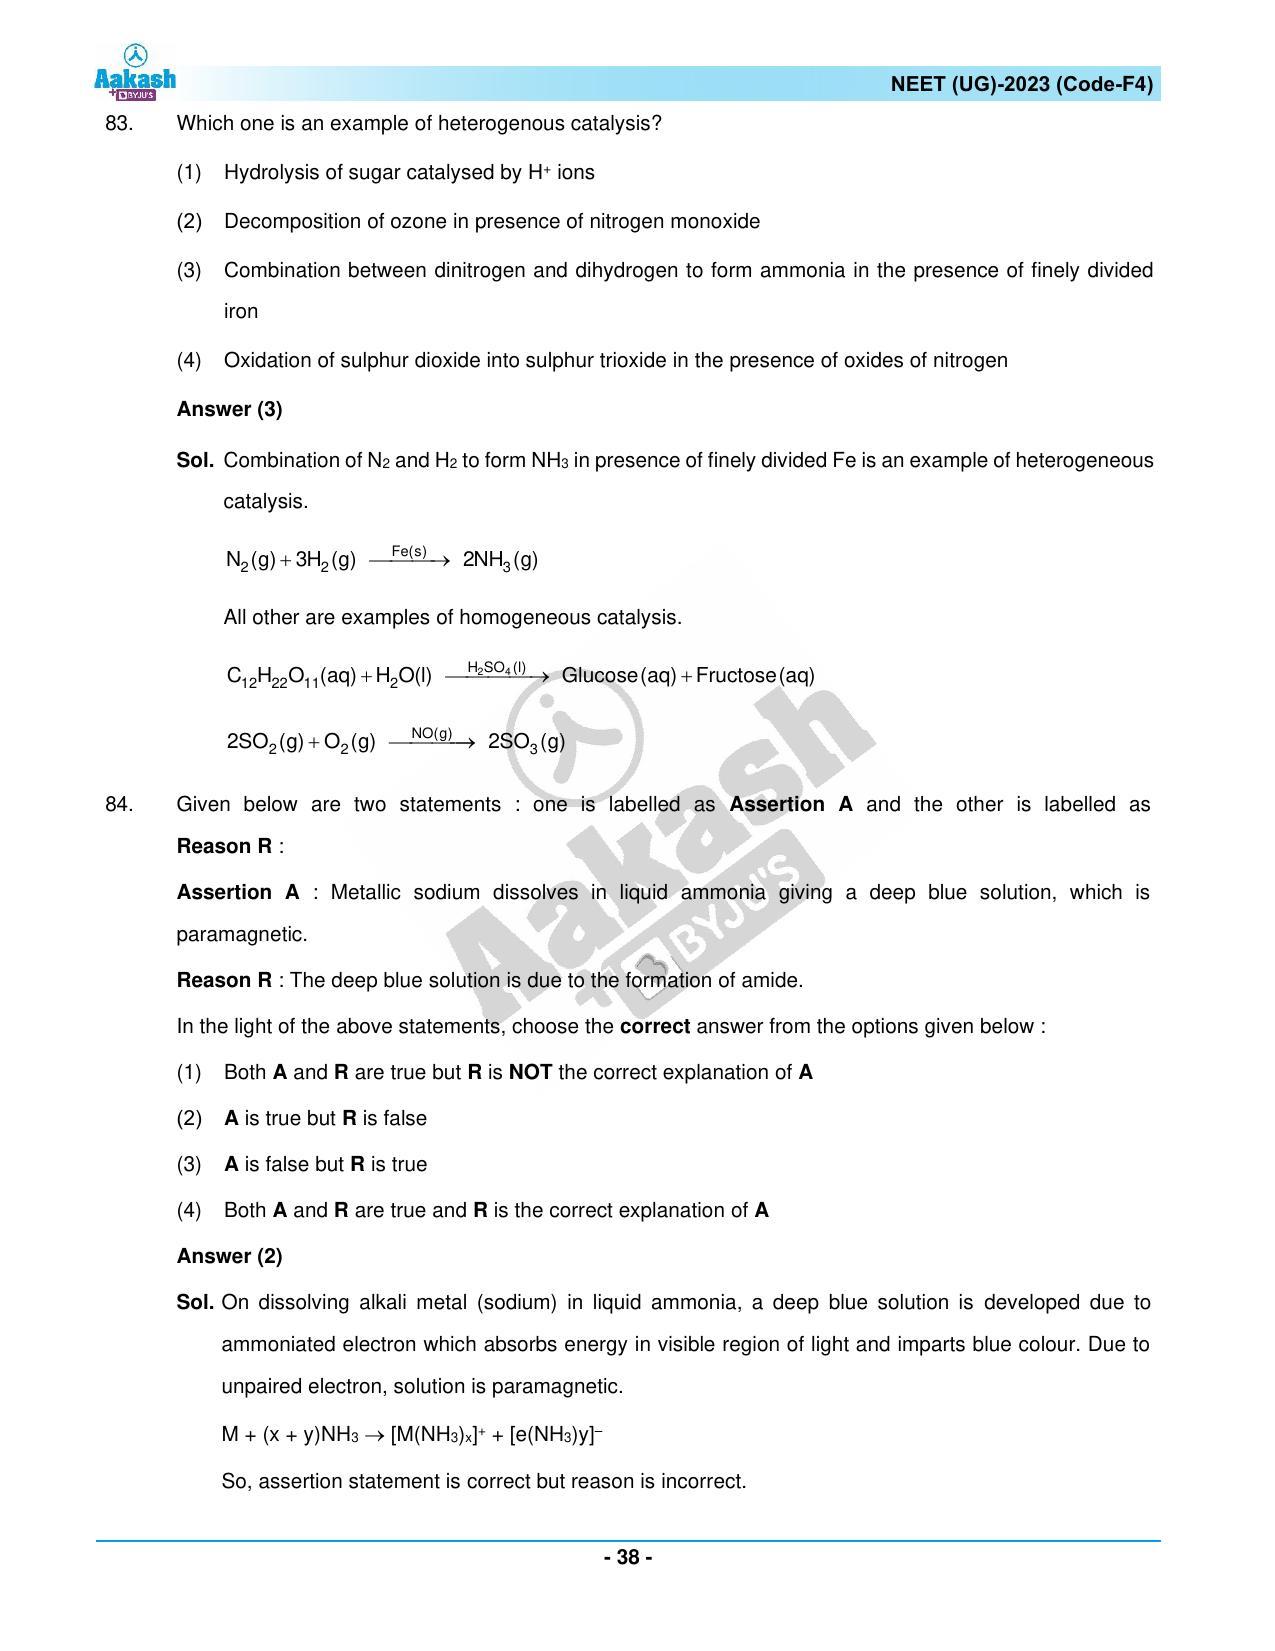 NEET 2023 Question Paper F4 - Page 38